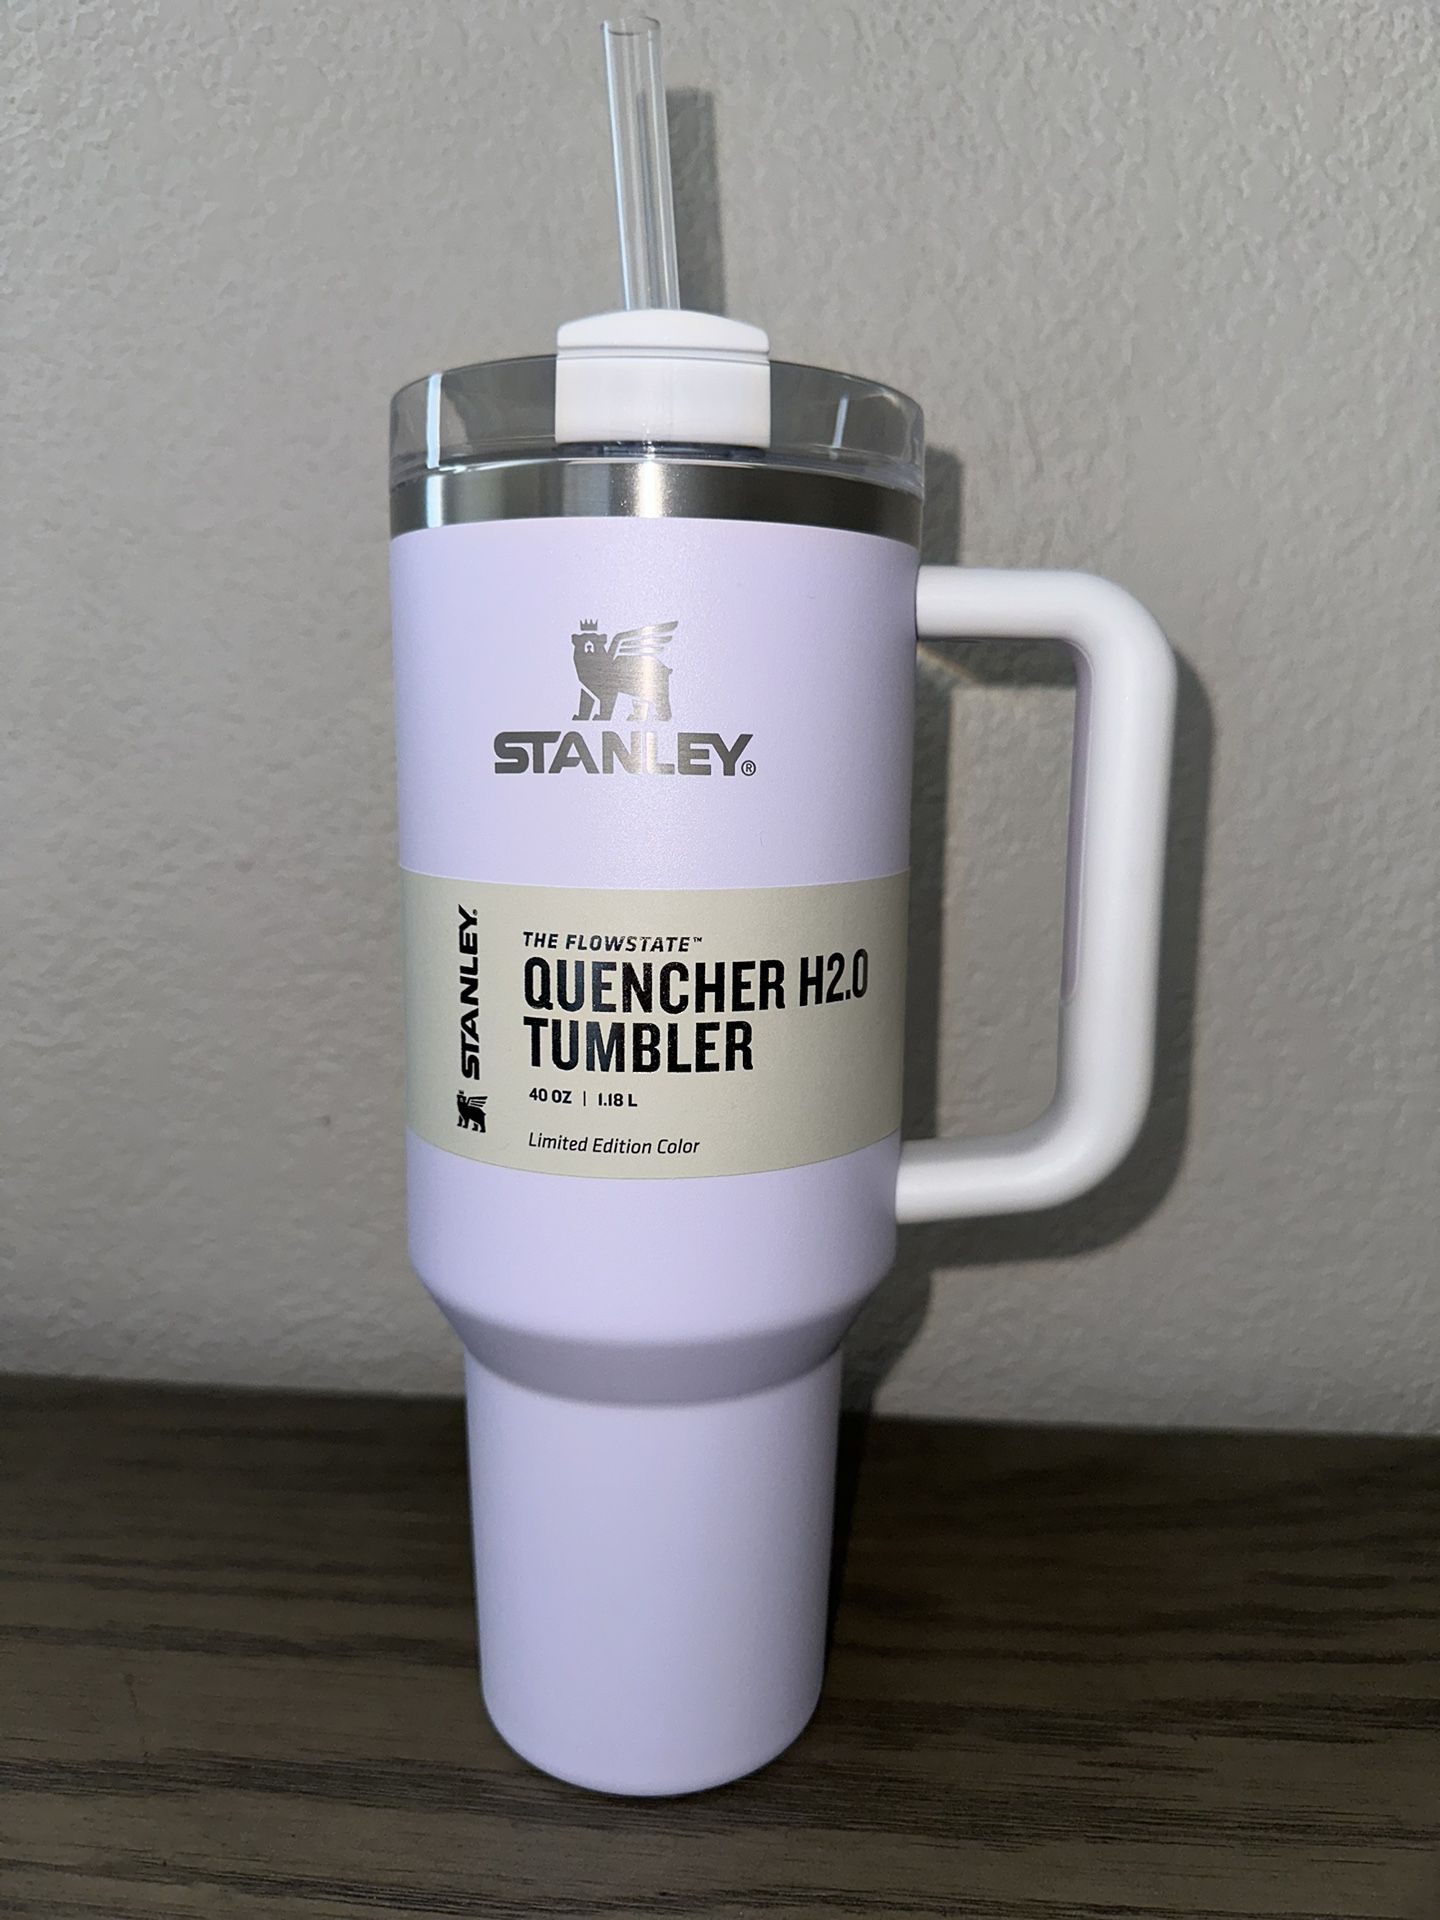 Stanley Flowstate Quencher H2.0 40oz Stainless Steel Tumbler Wisteria  Lavender